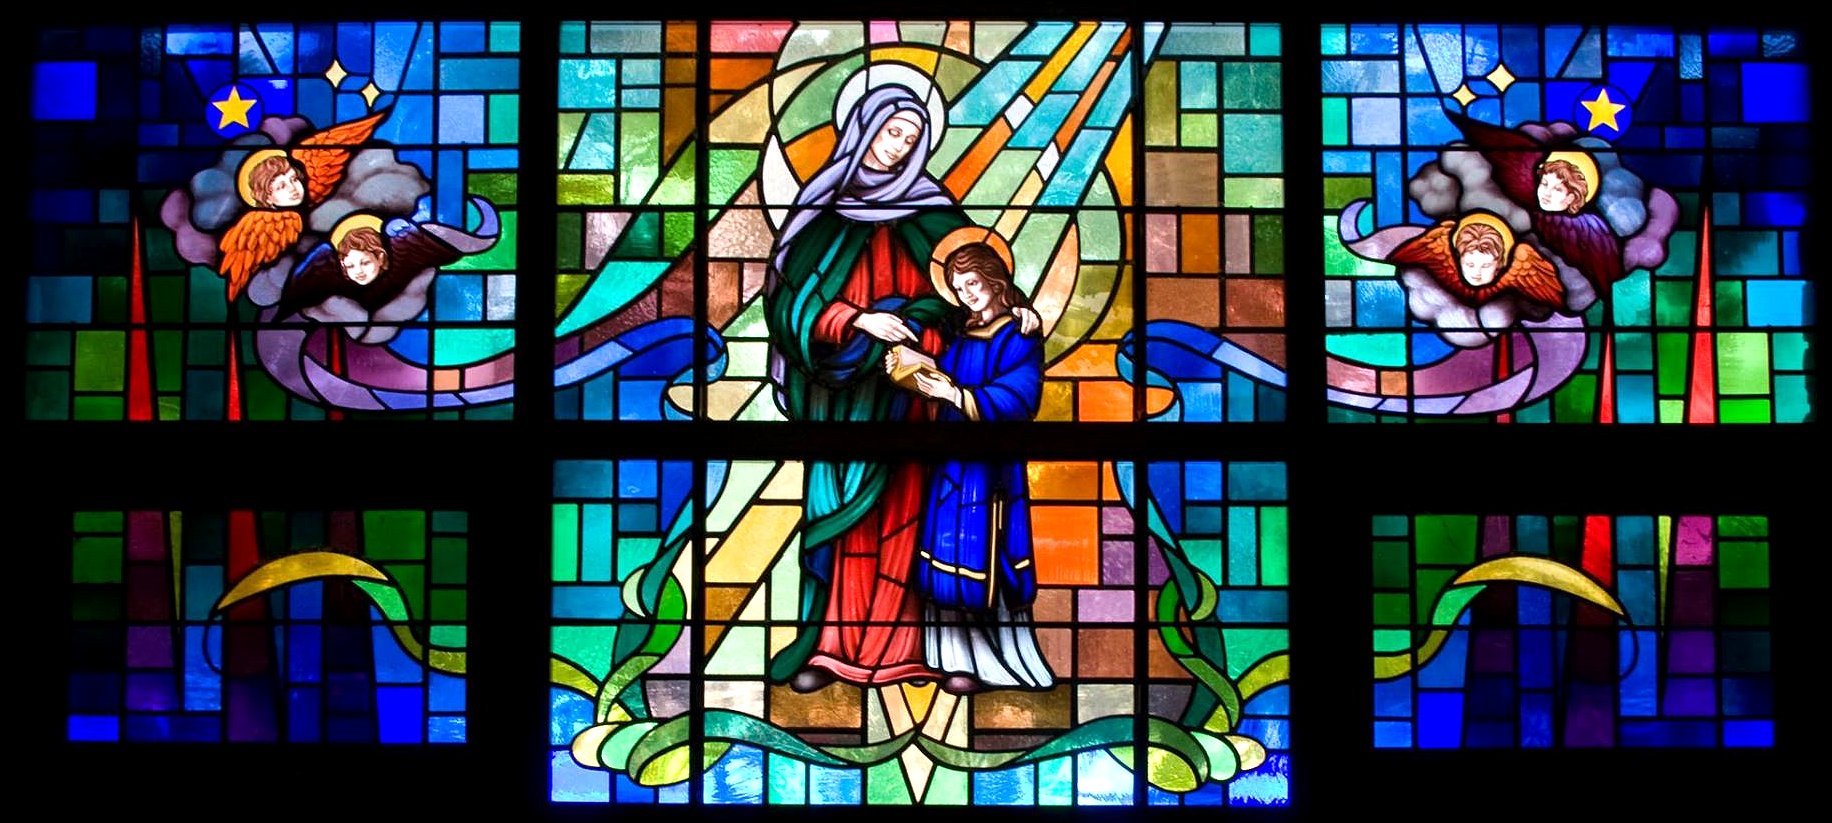 Saint Anne Stained Glass Google image from https://www.facebook.com/catholiccemeteriesfuneralservices/photos/pb.1549040632084620.-2207520000.1472364307./1653835971605085/?type=3&theater r